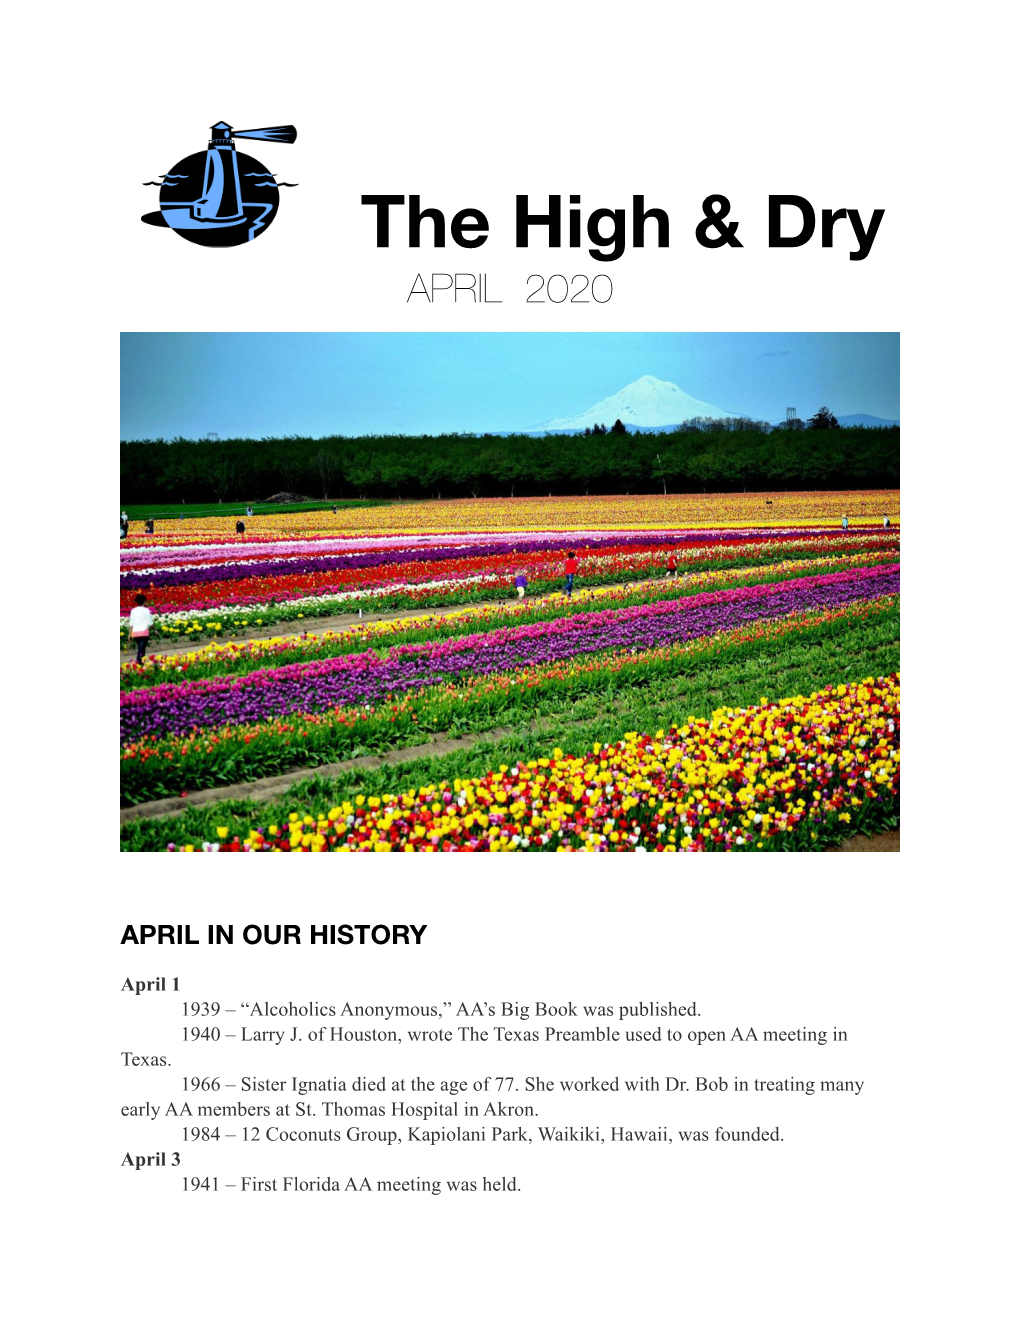 High and Dry April 2020